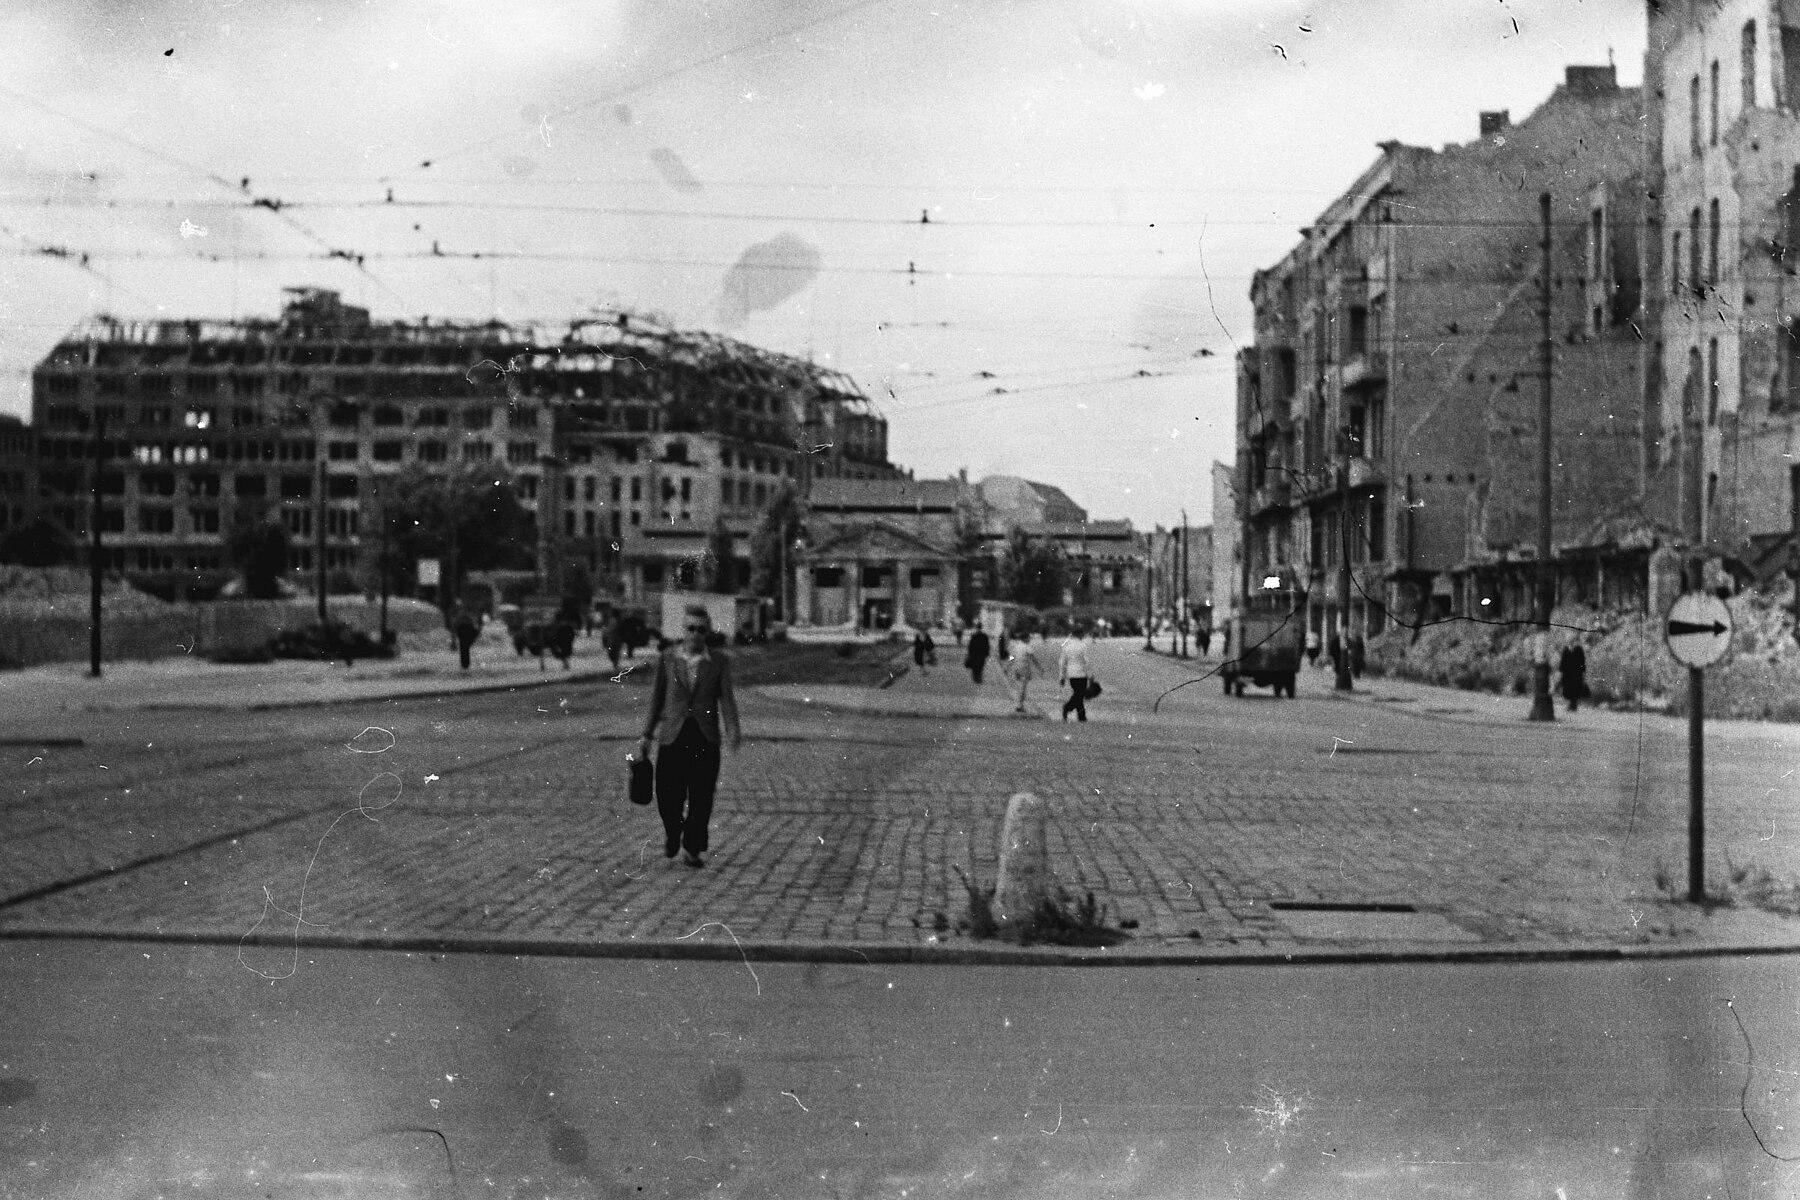 A cobbled square, on the left and right in the background are buildings damaged by bombs. 